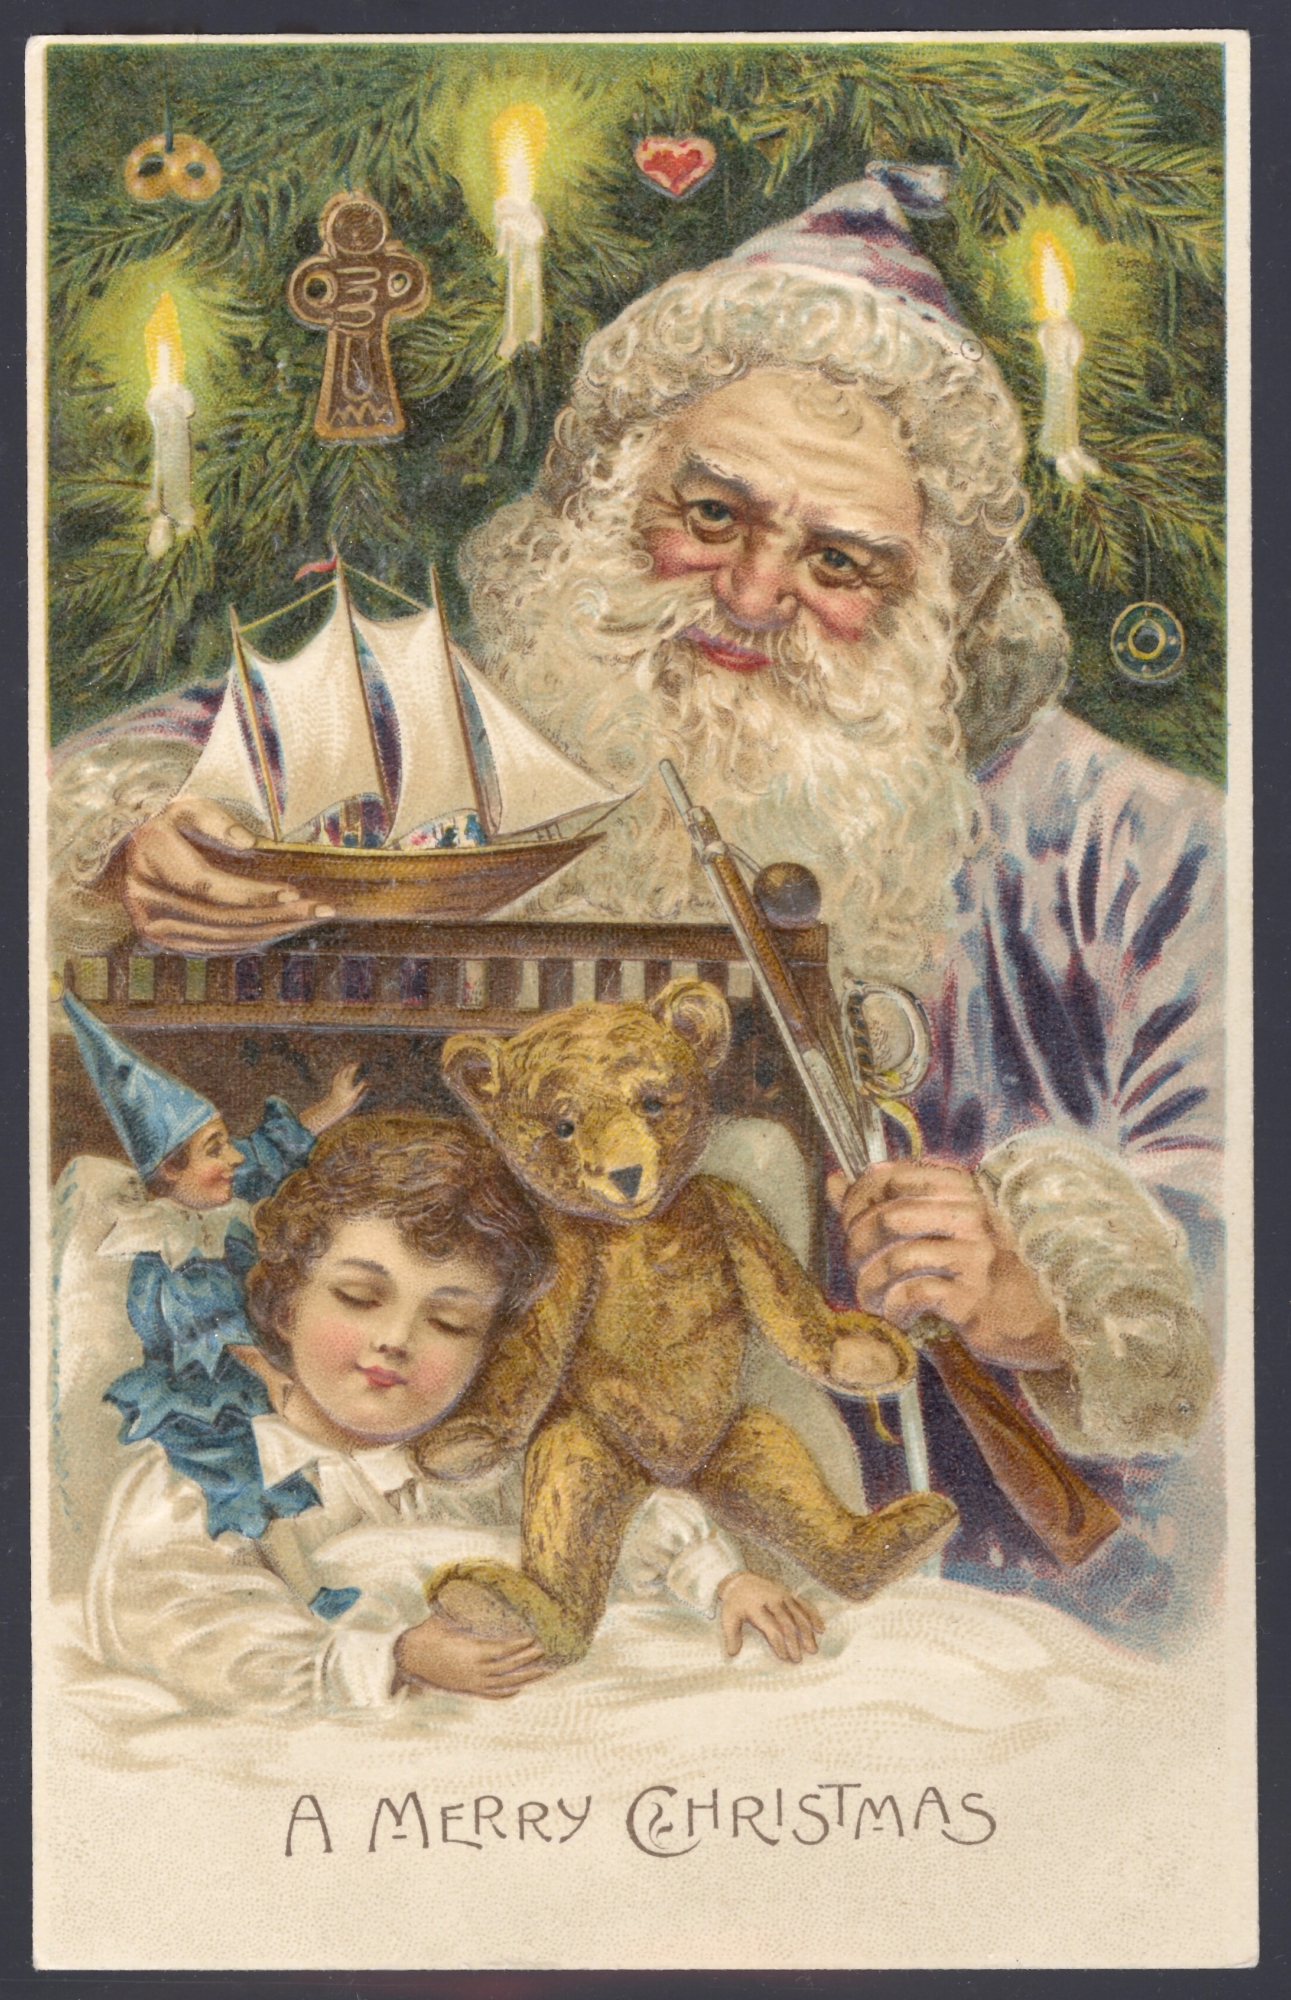 Santa wearing a purple robe. Lithographed in Germany (embossed)